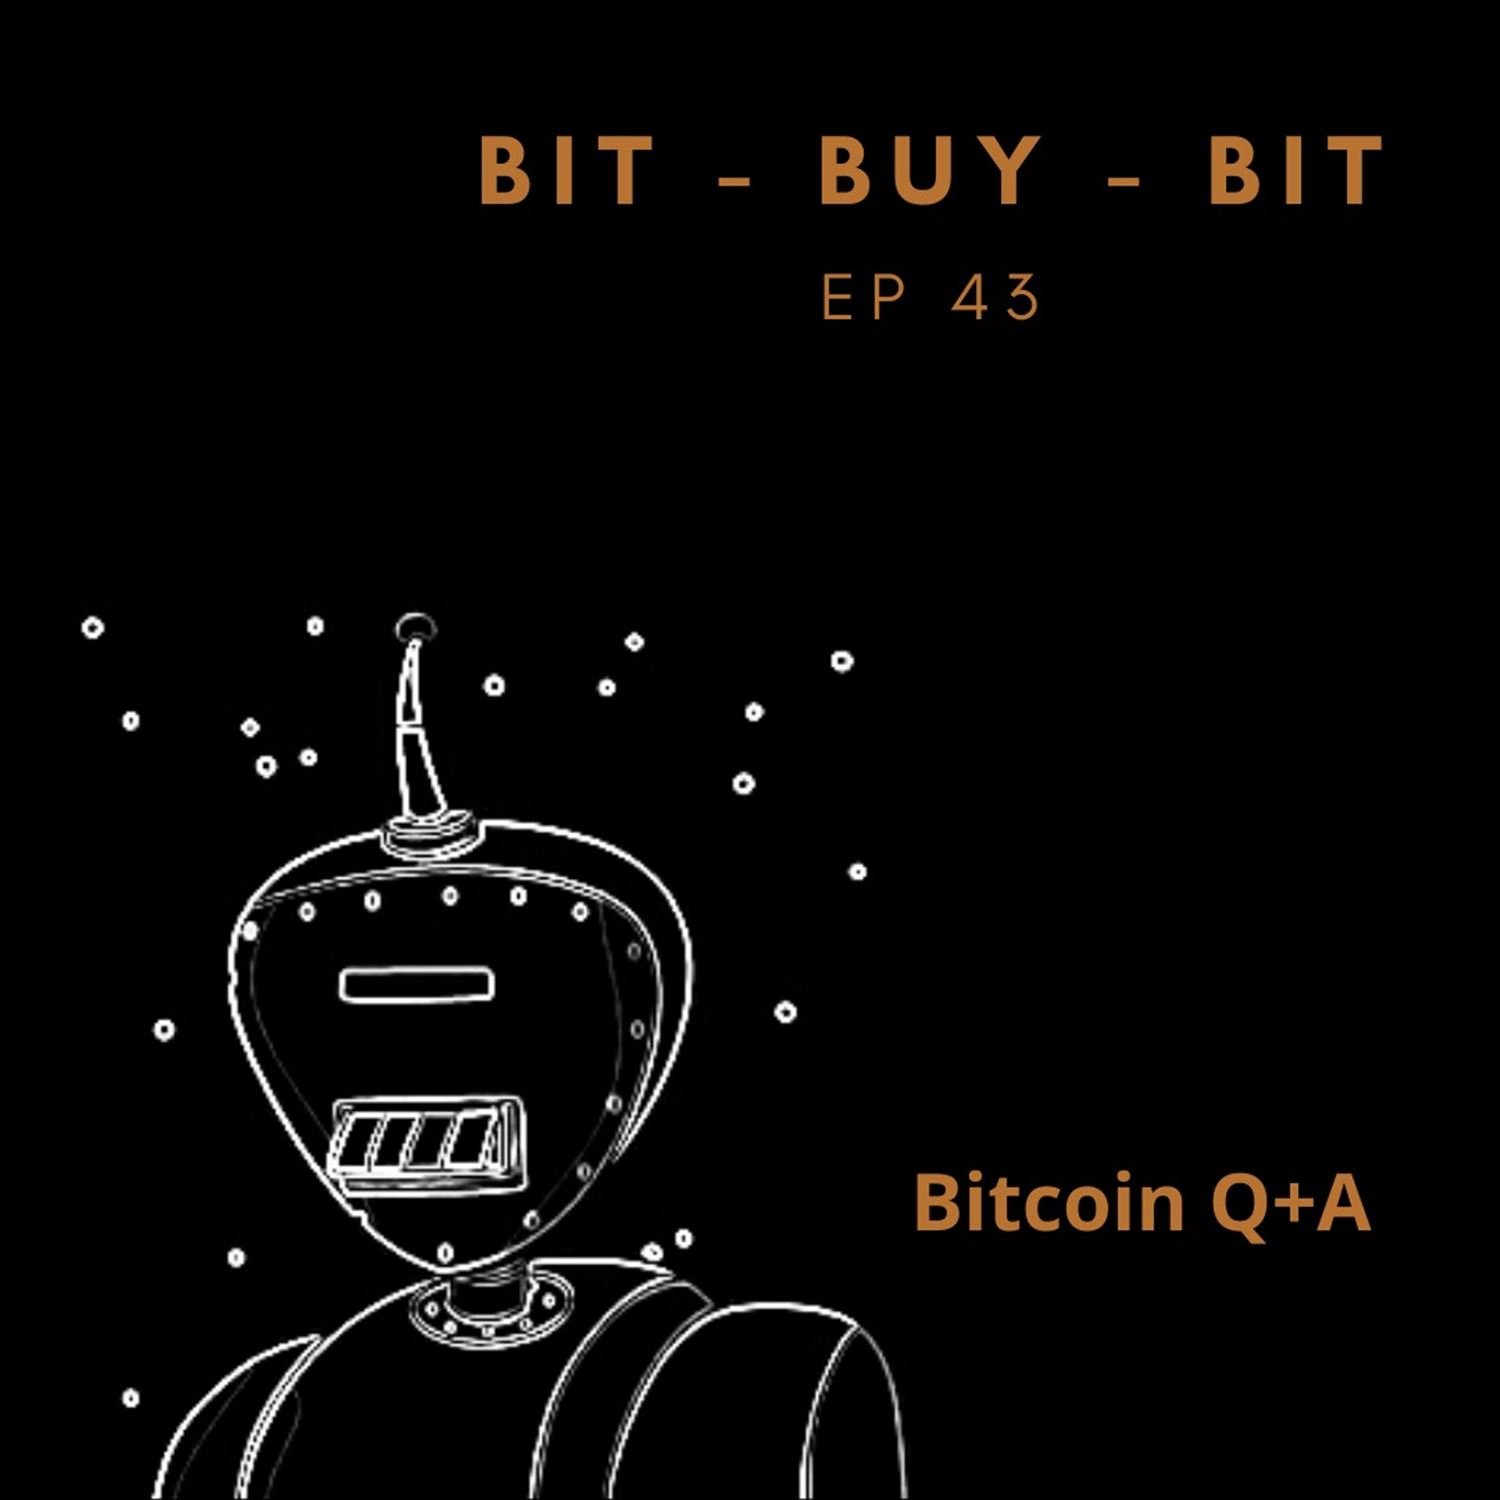 EP43 Bitcoin podcast with Bitcoin Q+A. (Coinjoin)